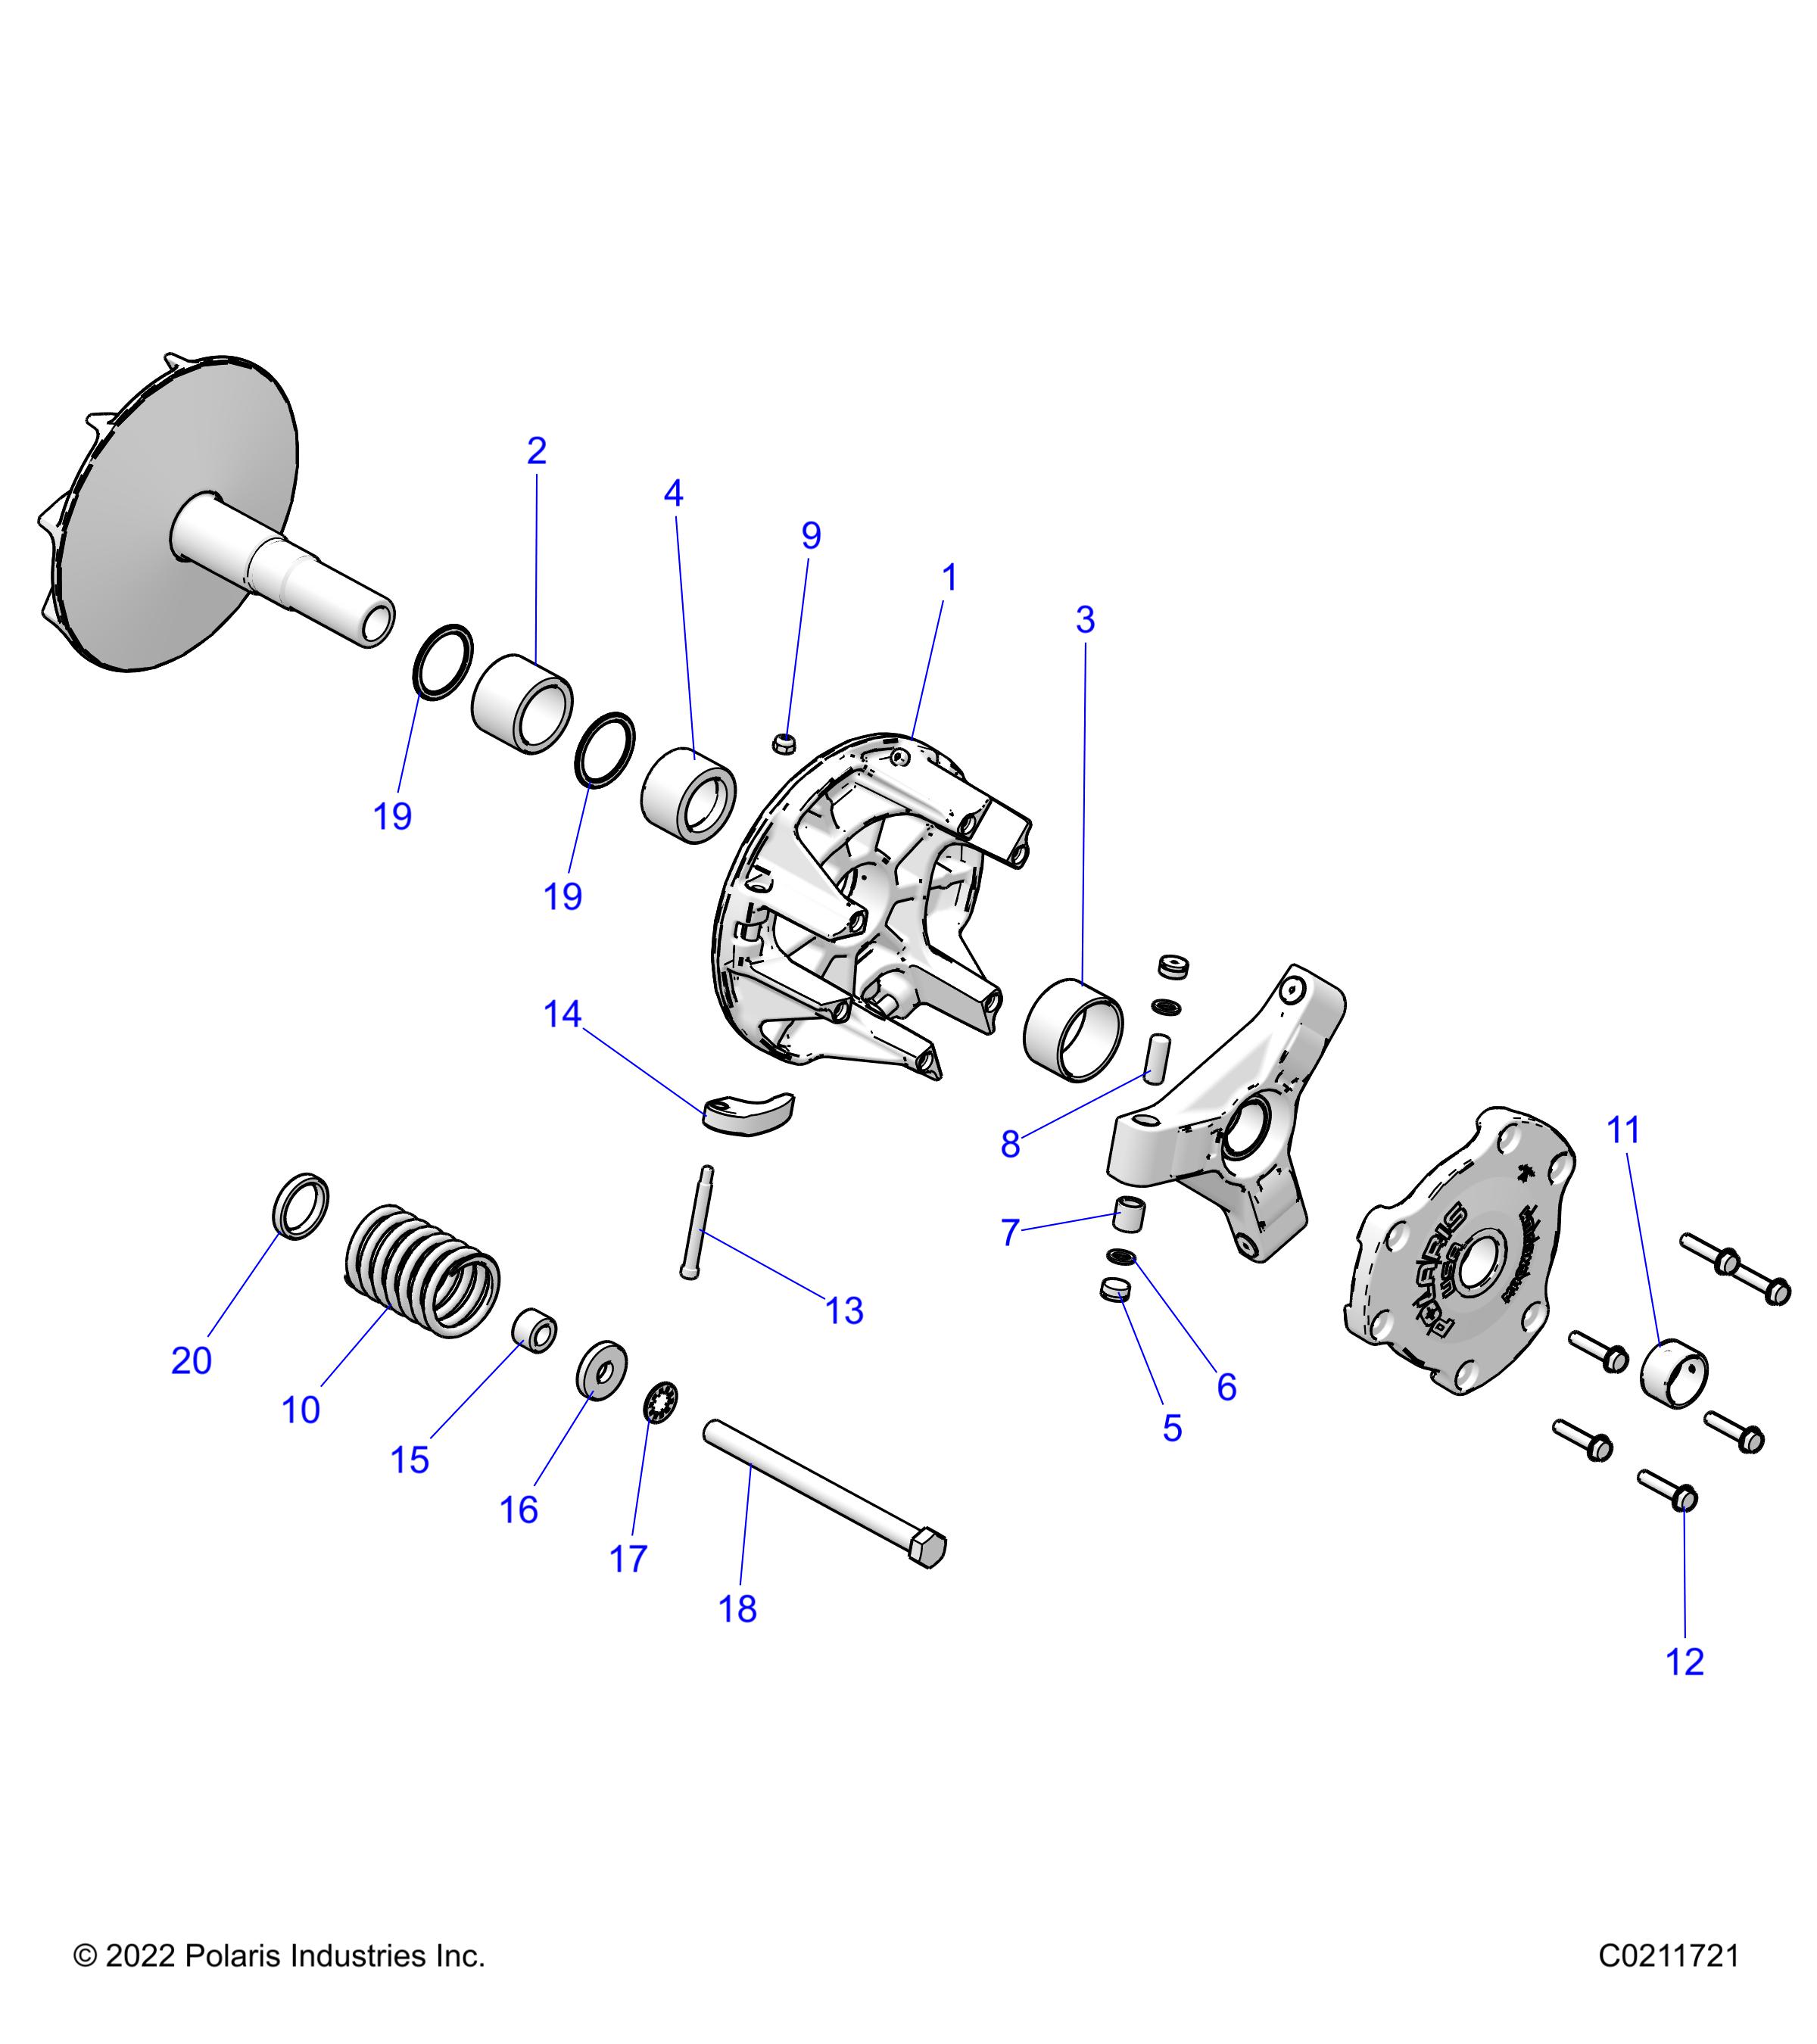 Part Number : 1323378 BASIC DRIVE CLUTCH ASSEMBLY